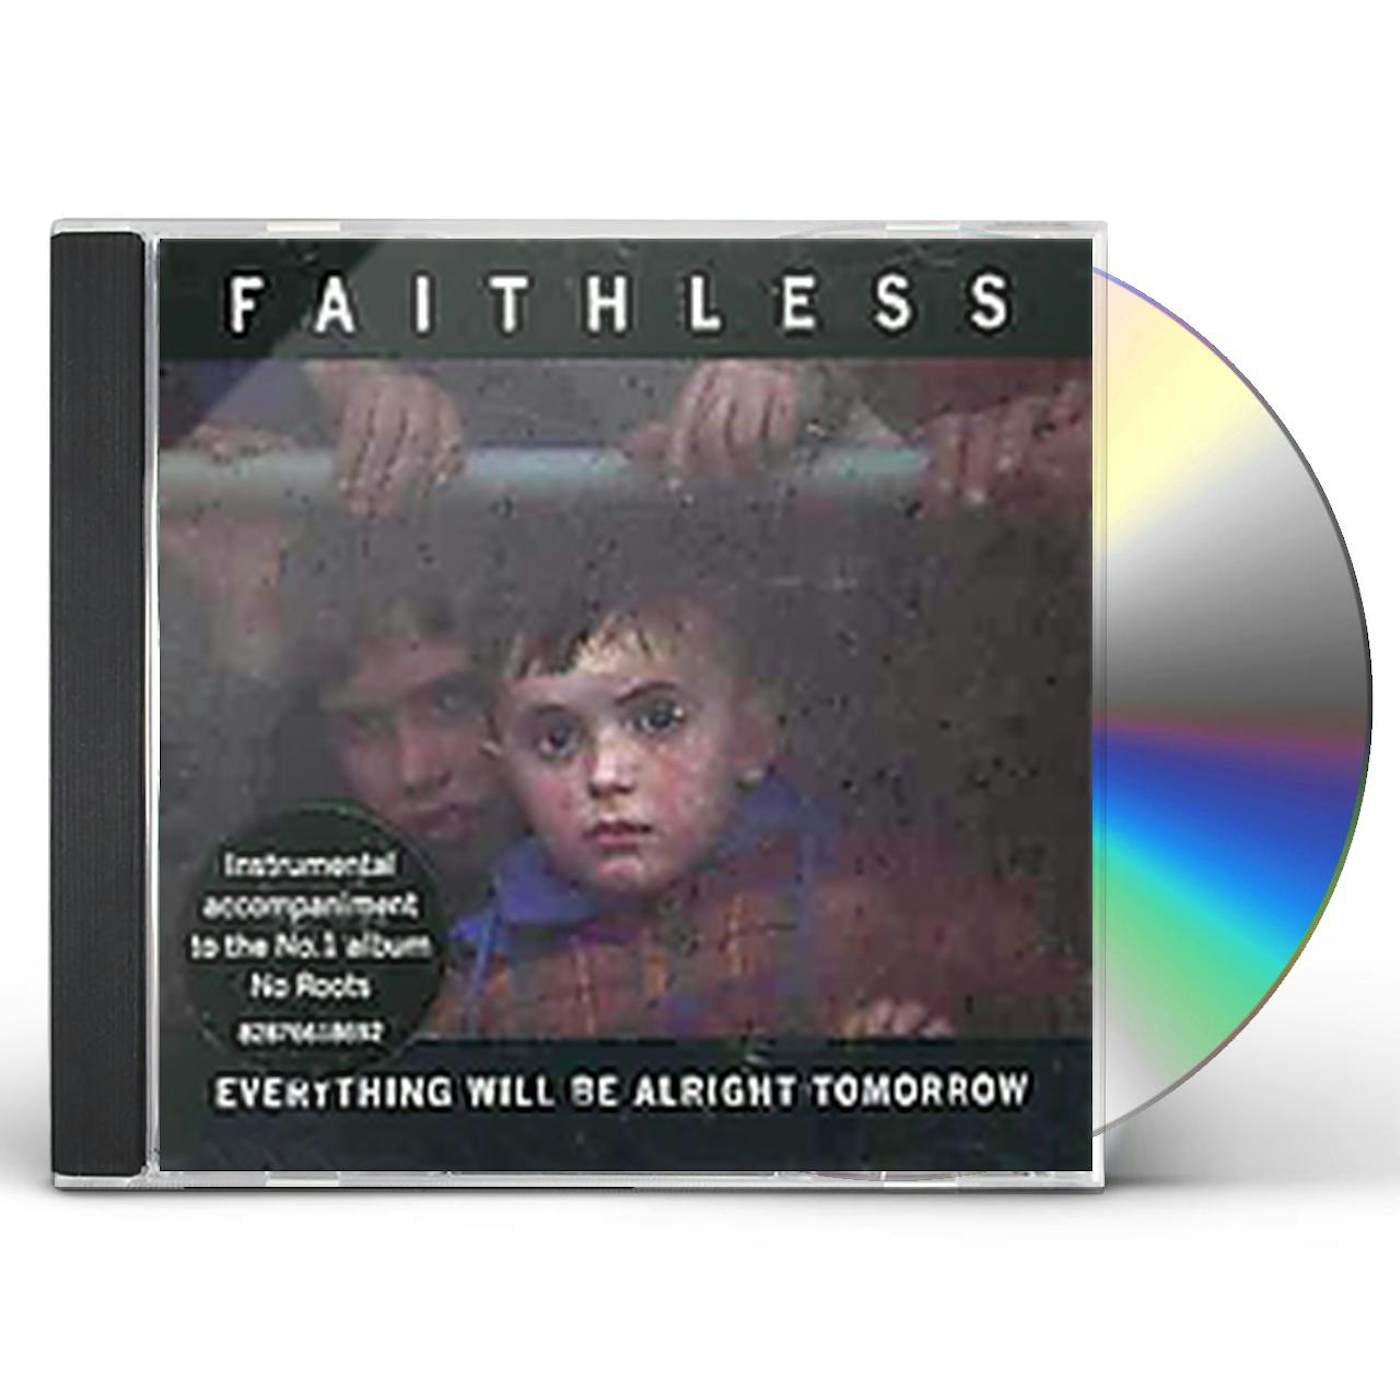 Faithless EVERYTHING WILL BE ALRIGHT TOMORROW CD